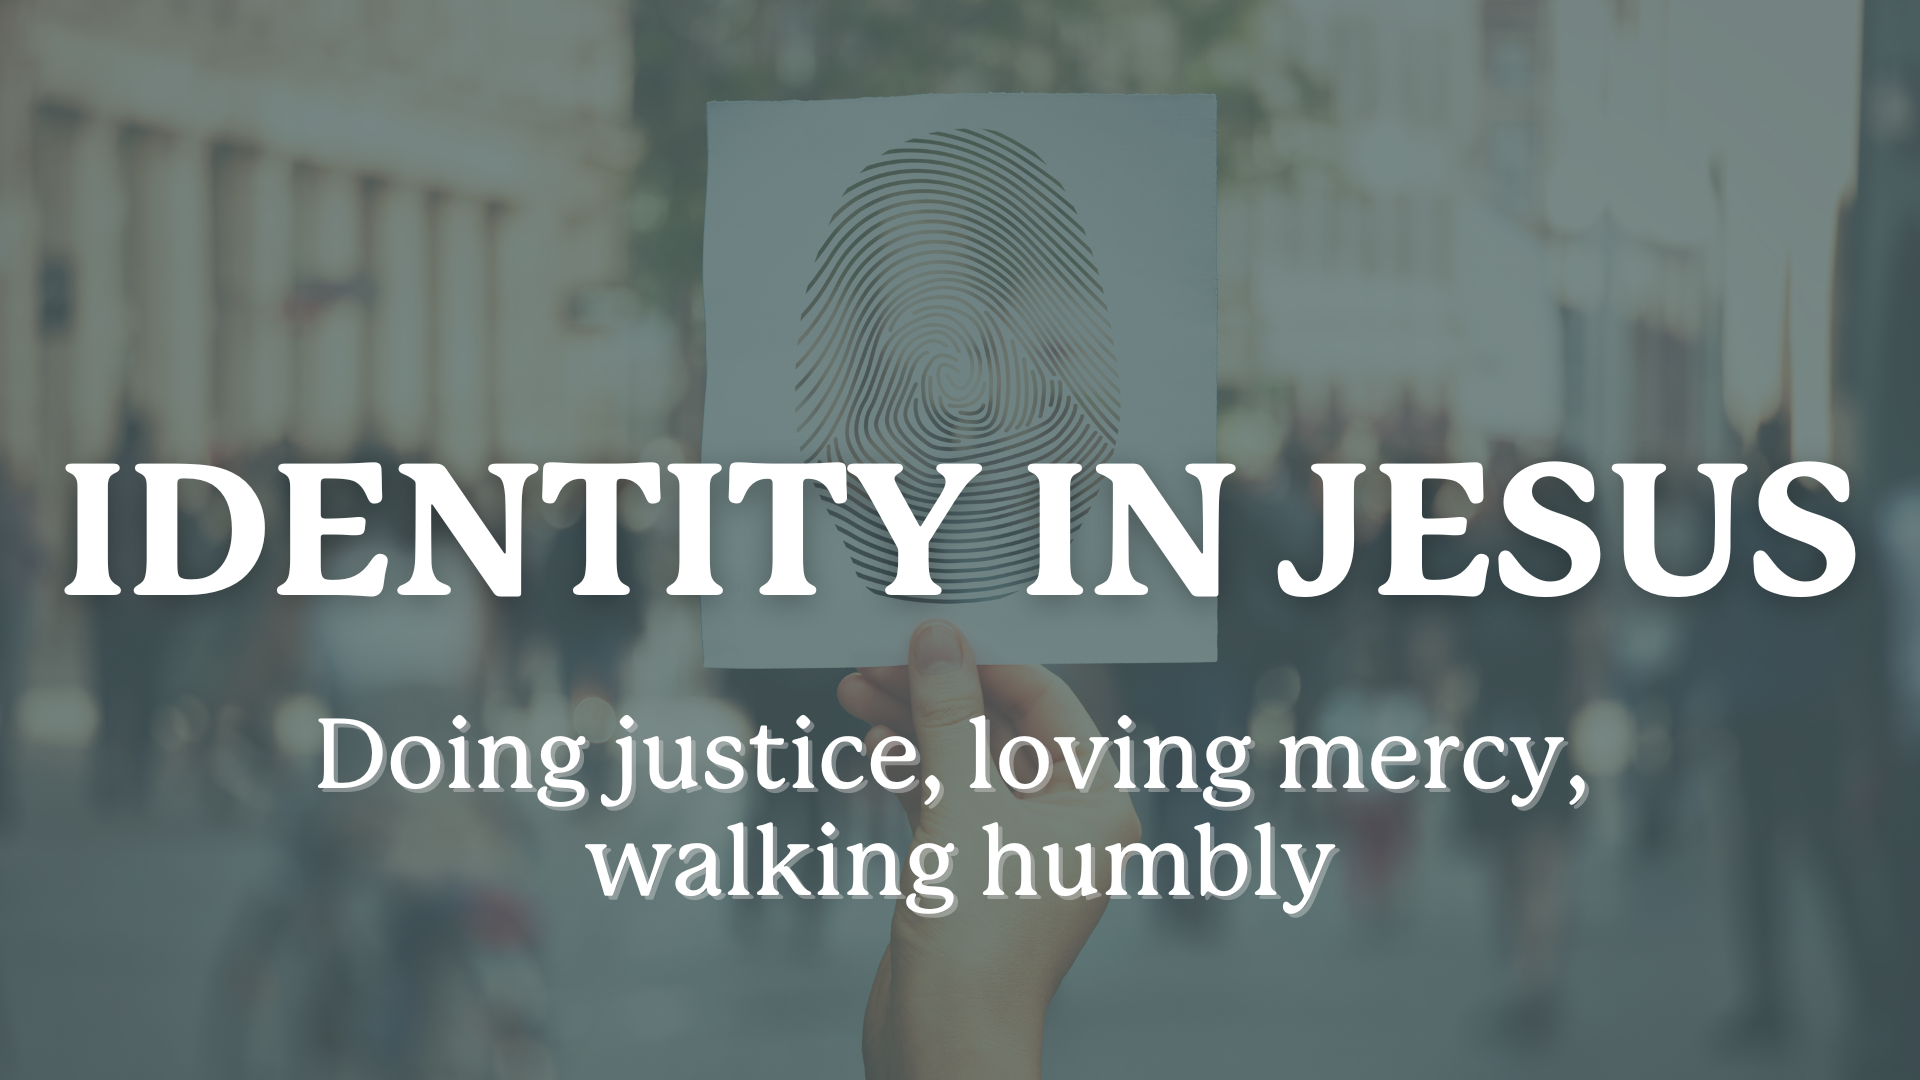 Sunday Service - Justice, Love Mercy and Humility